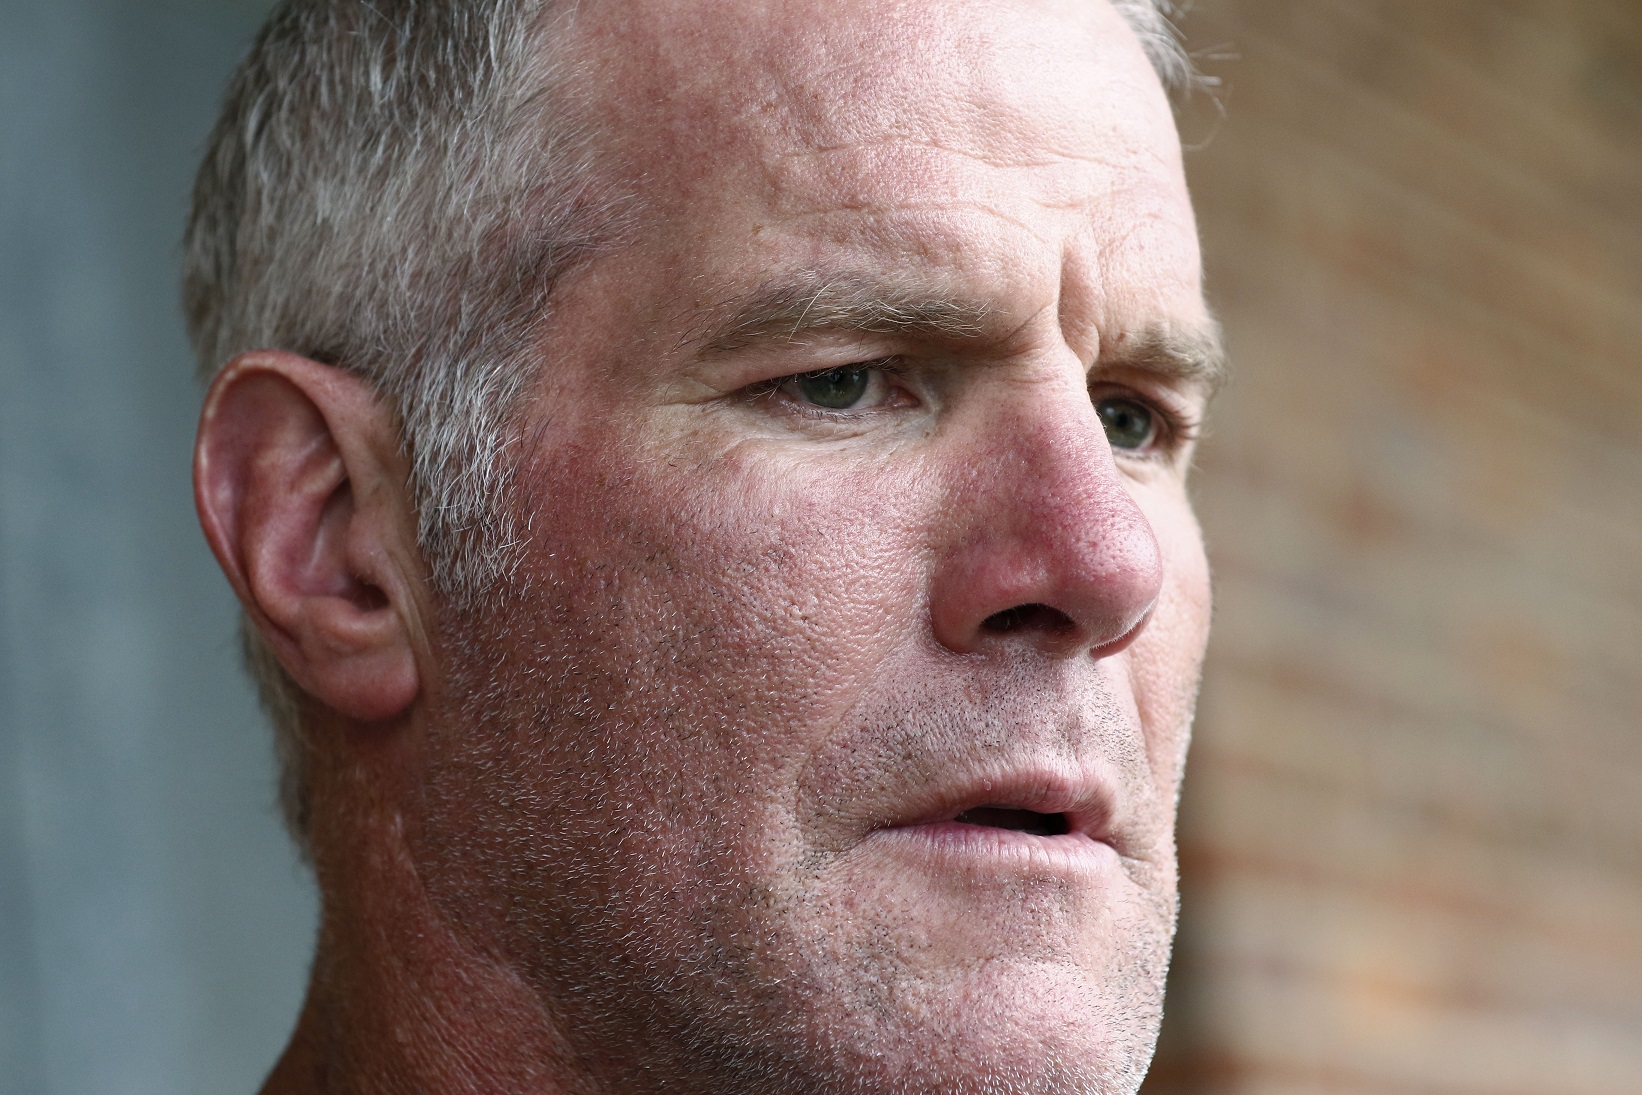 Column: Brett Favre would be wise to pay up and shut up